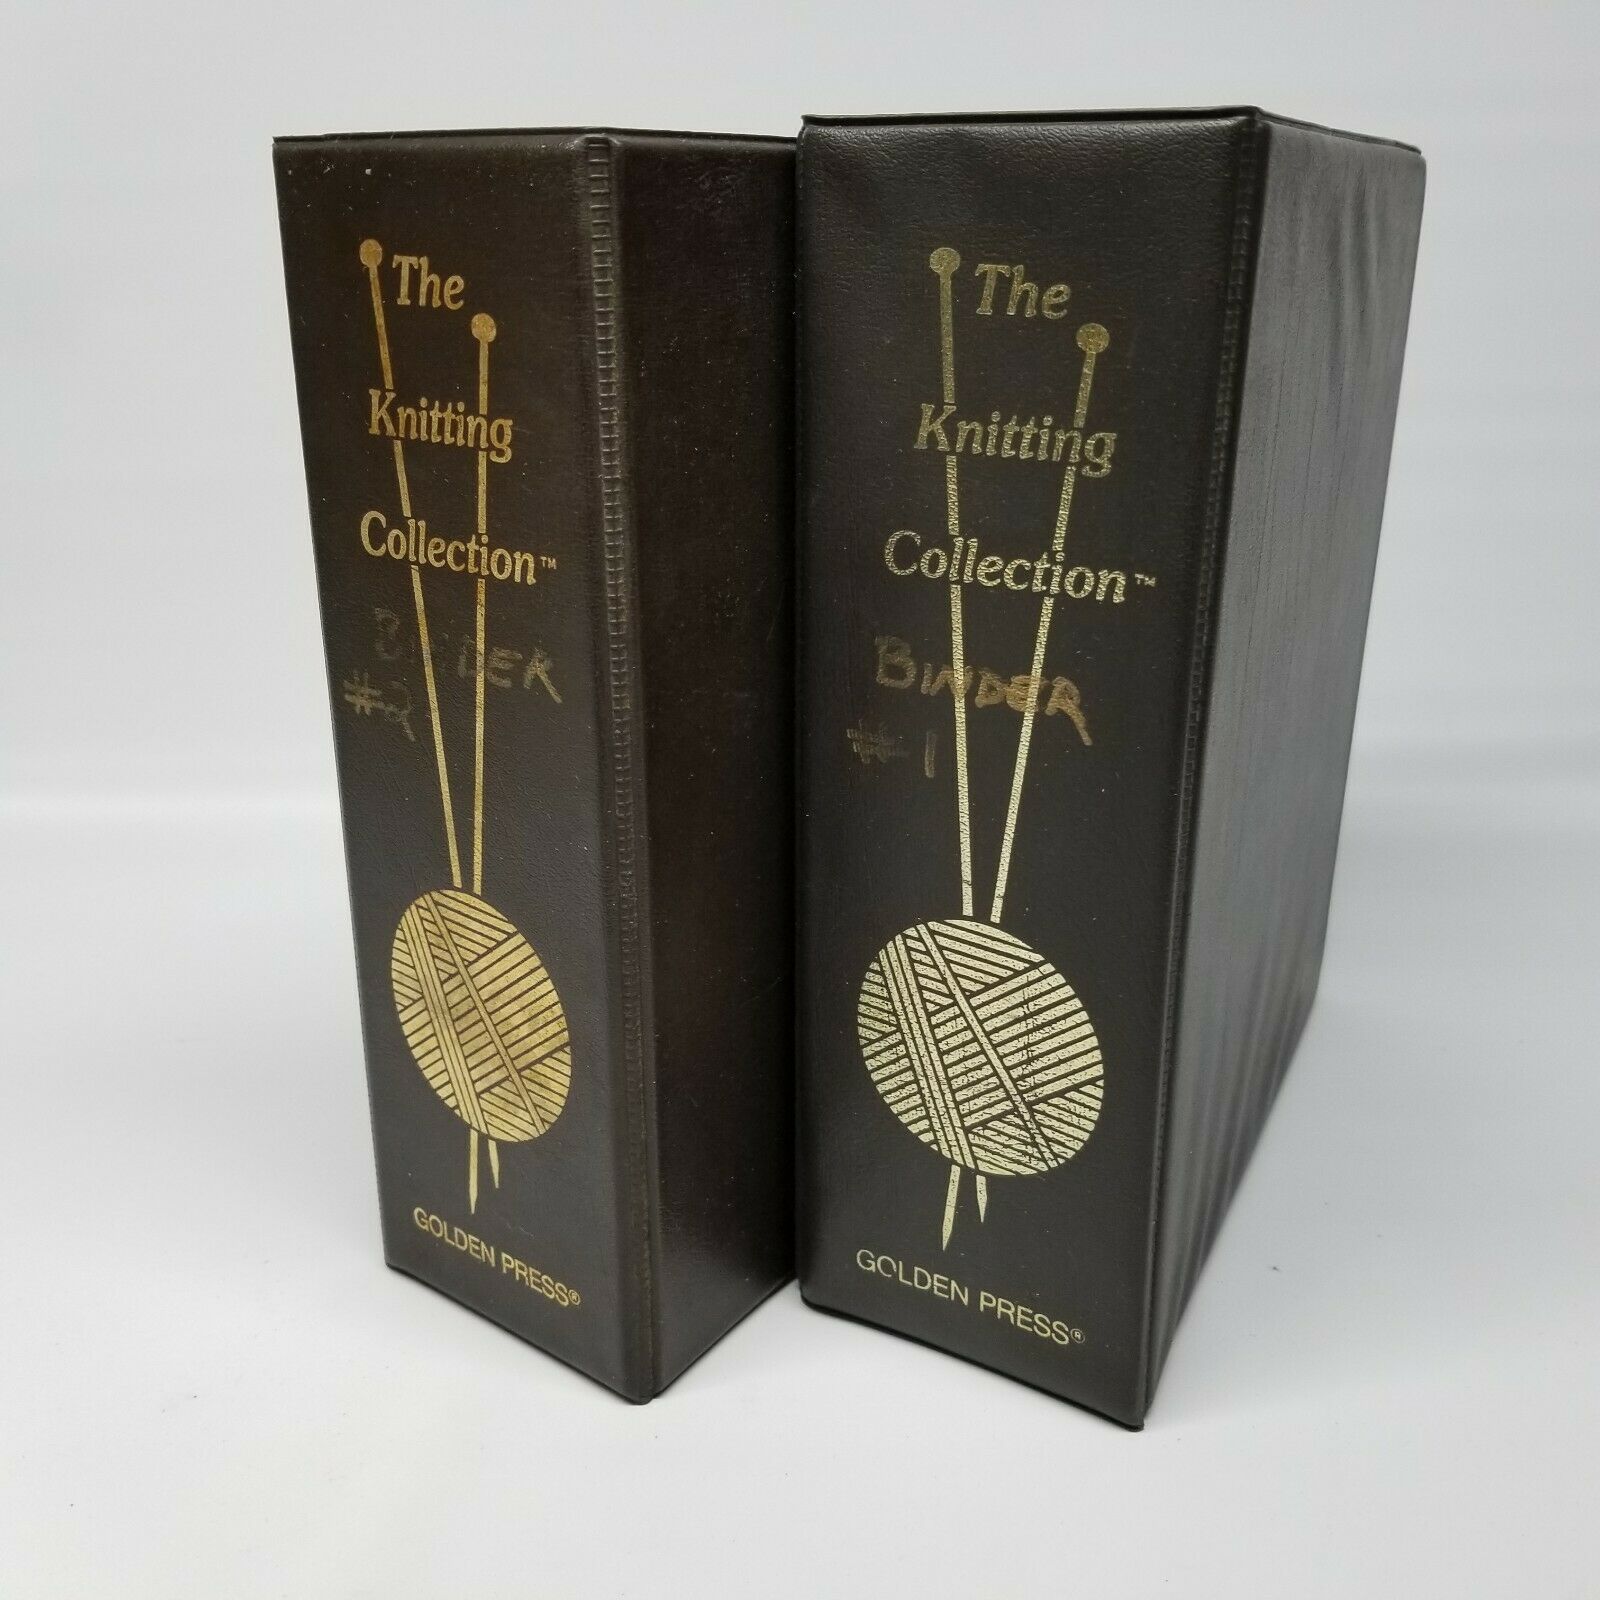 The Knitting Collection Golden Press Lot Volumes 1 & 2 1982 USA - $22.65